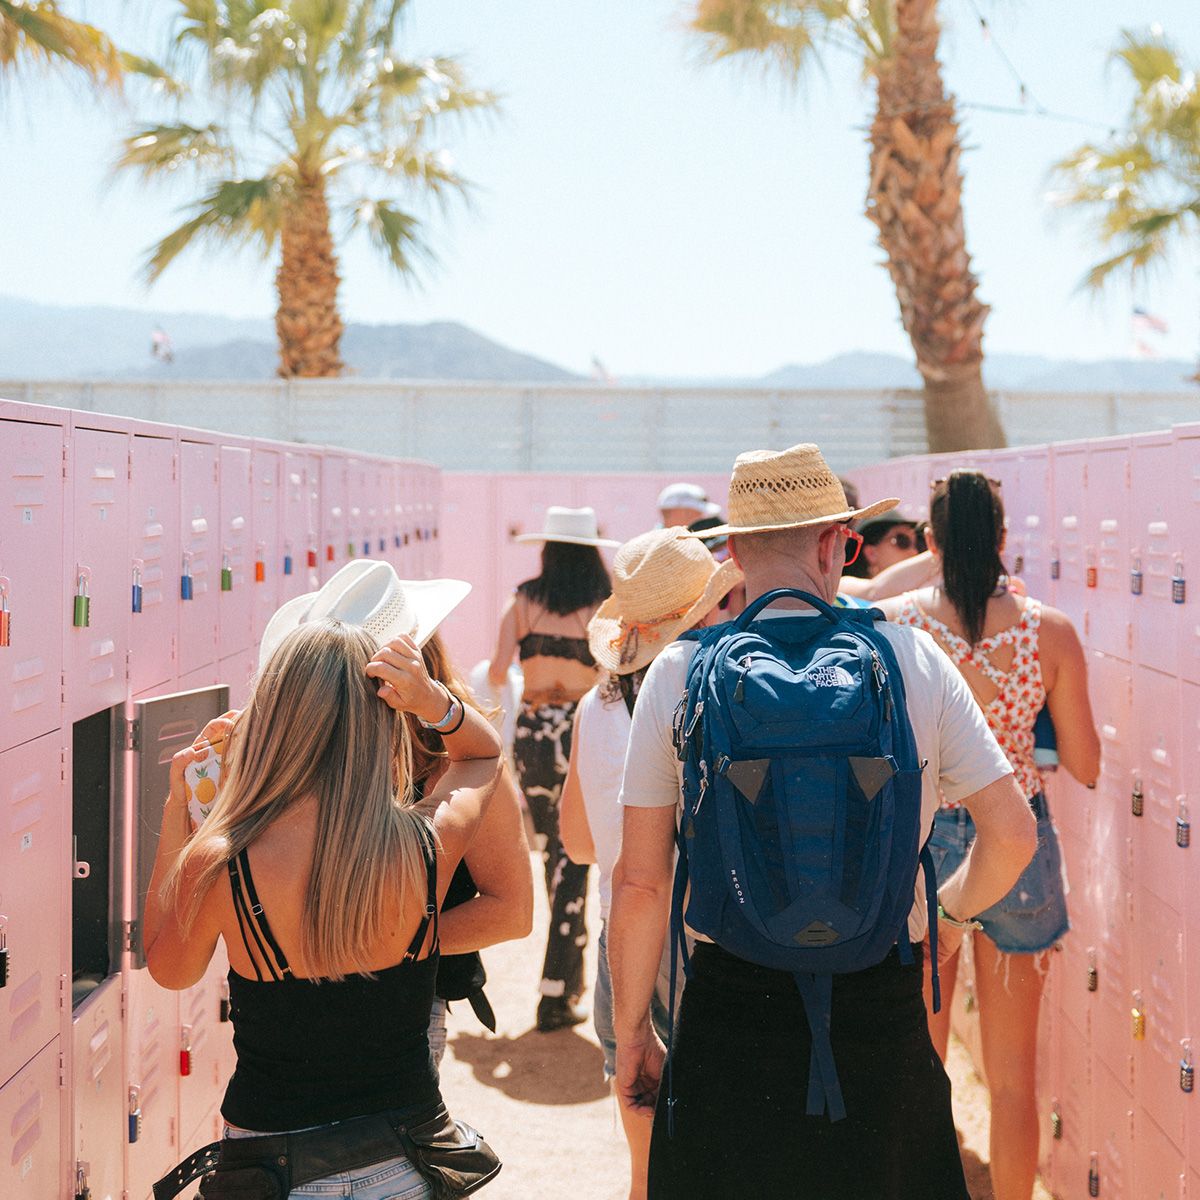 Lockers at Stagecoach